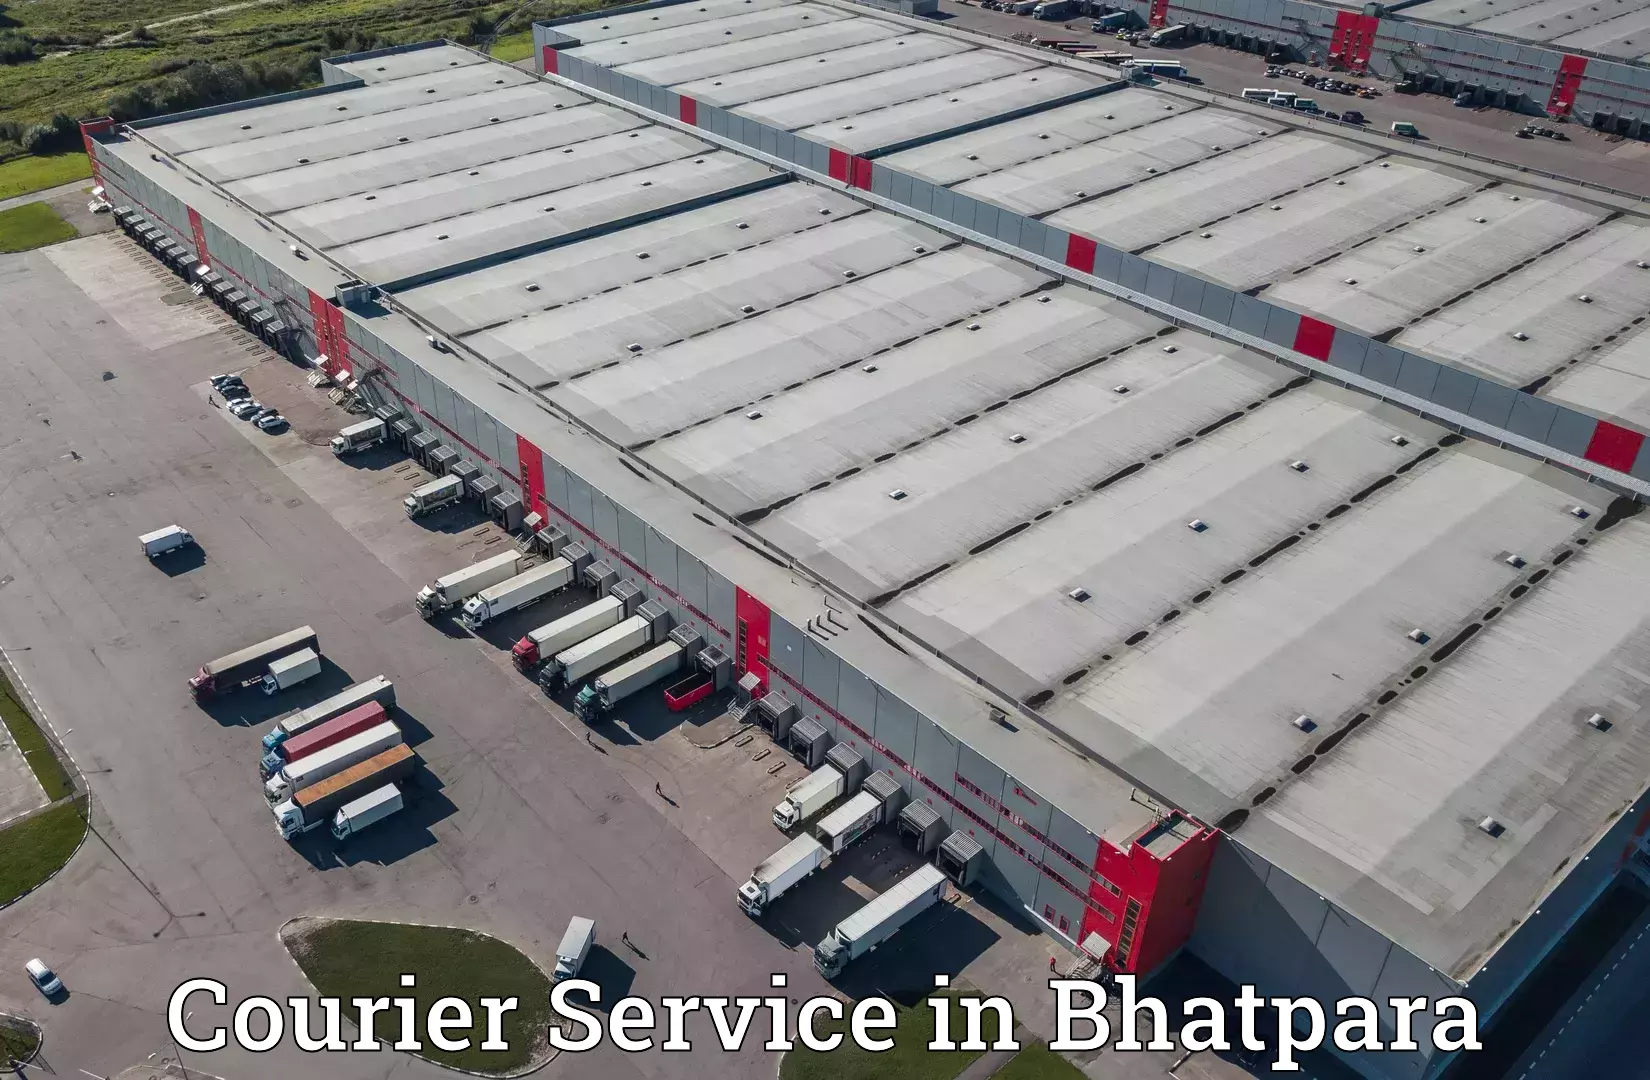 Comprehensive shipping services in Bhatpara